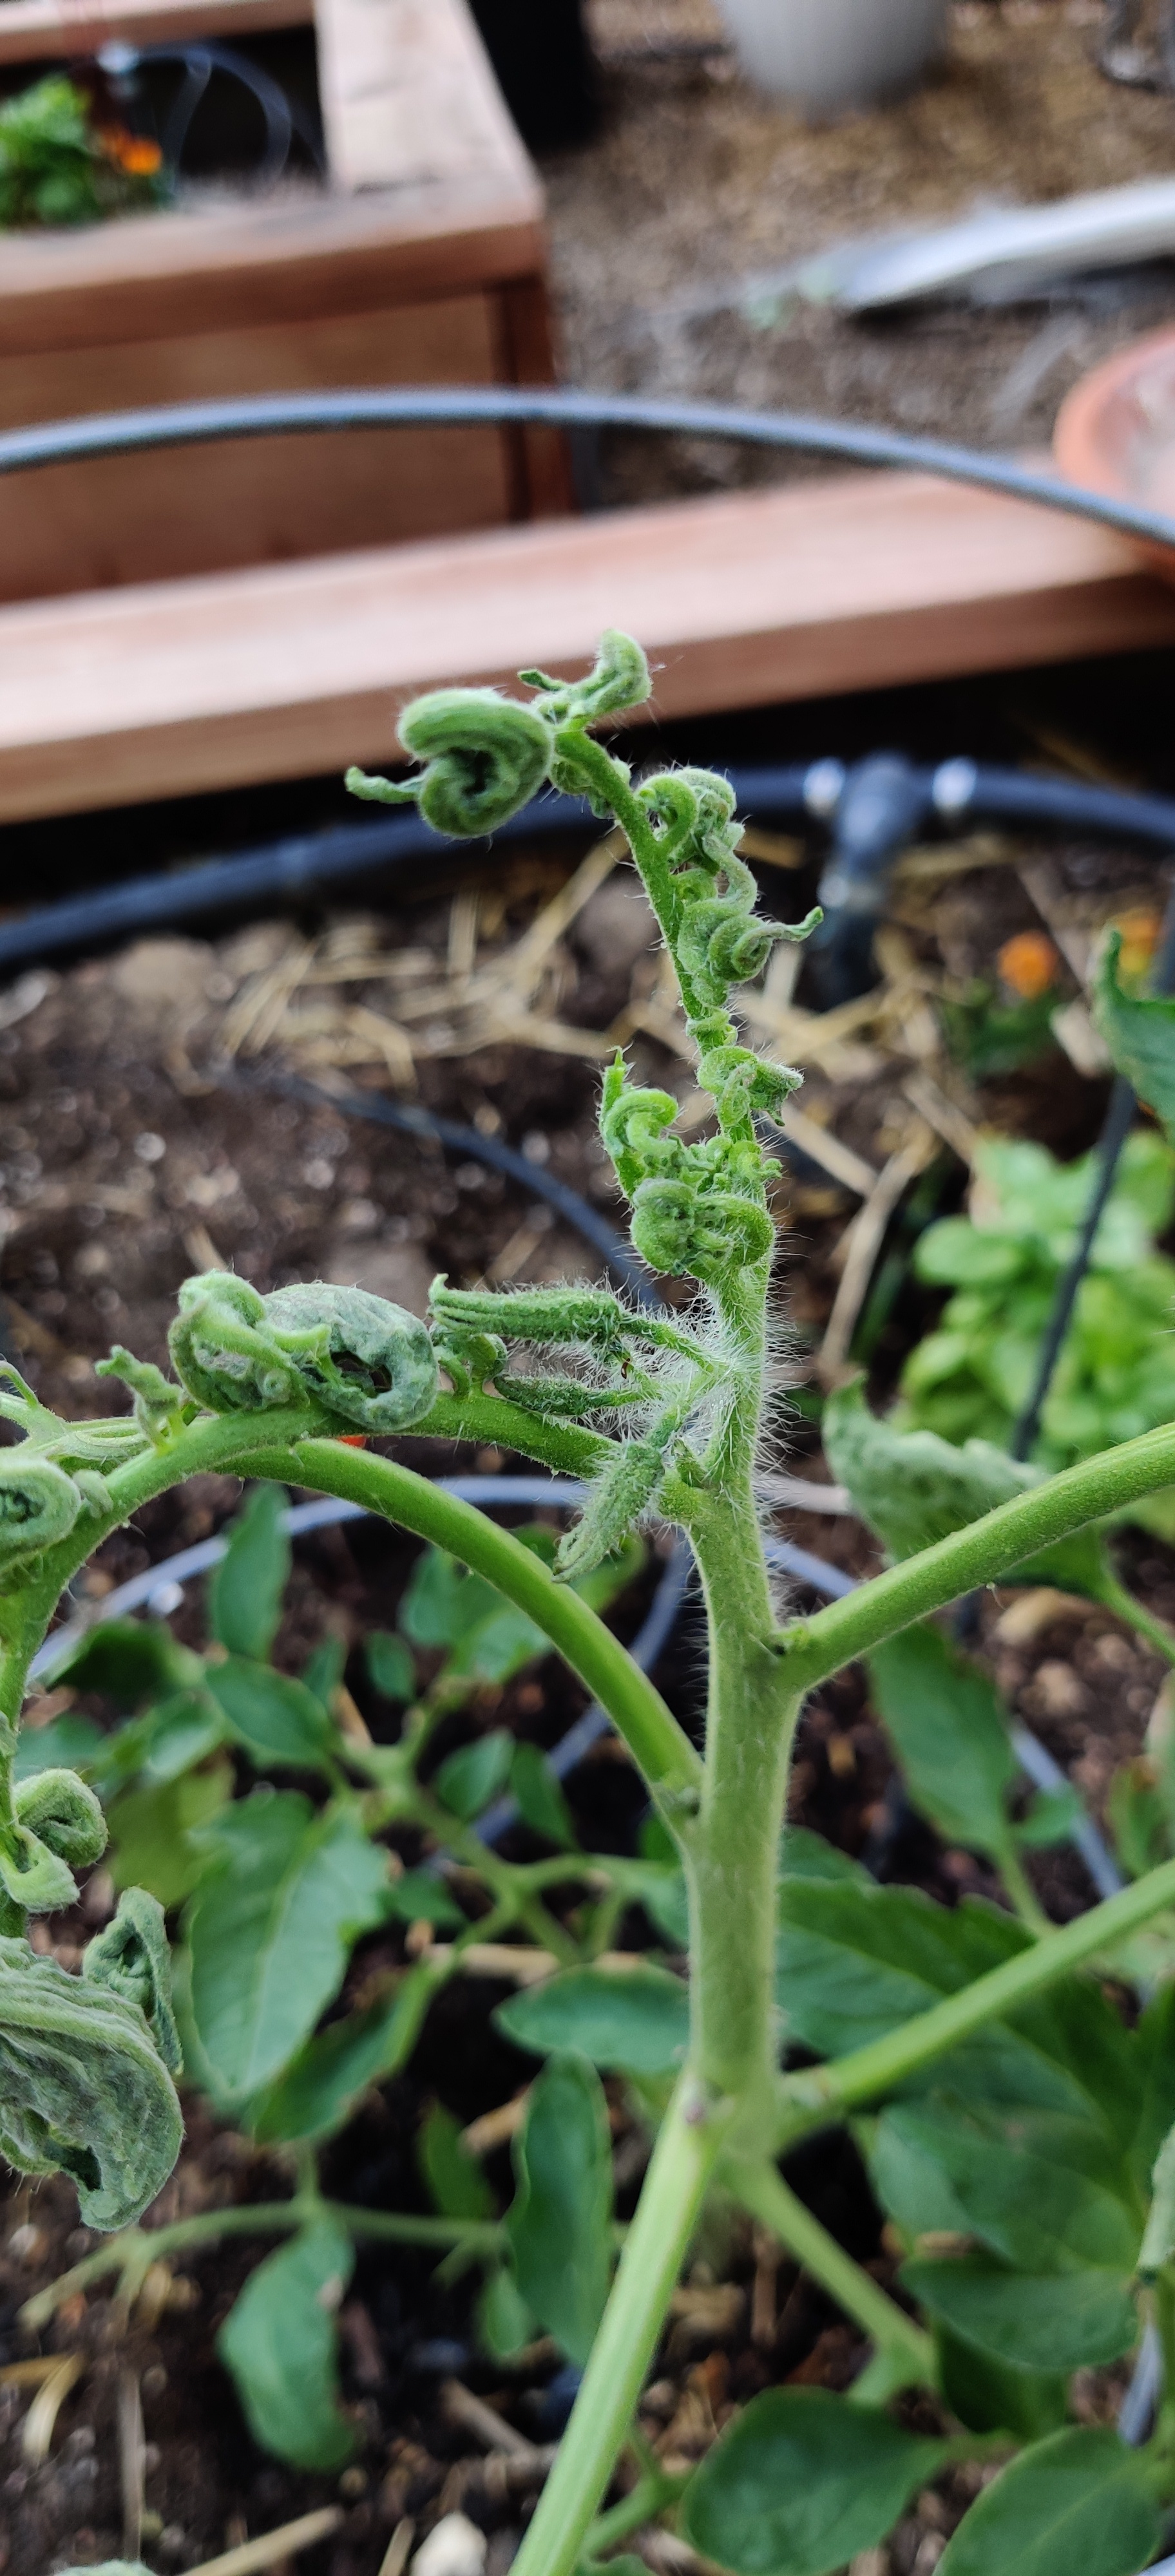 Why are my tomato plants curling/spiraling? #646236 - Ask Extension